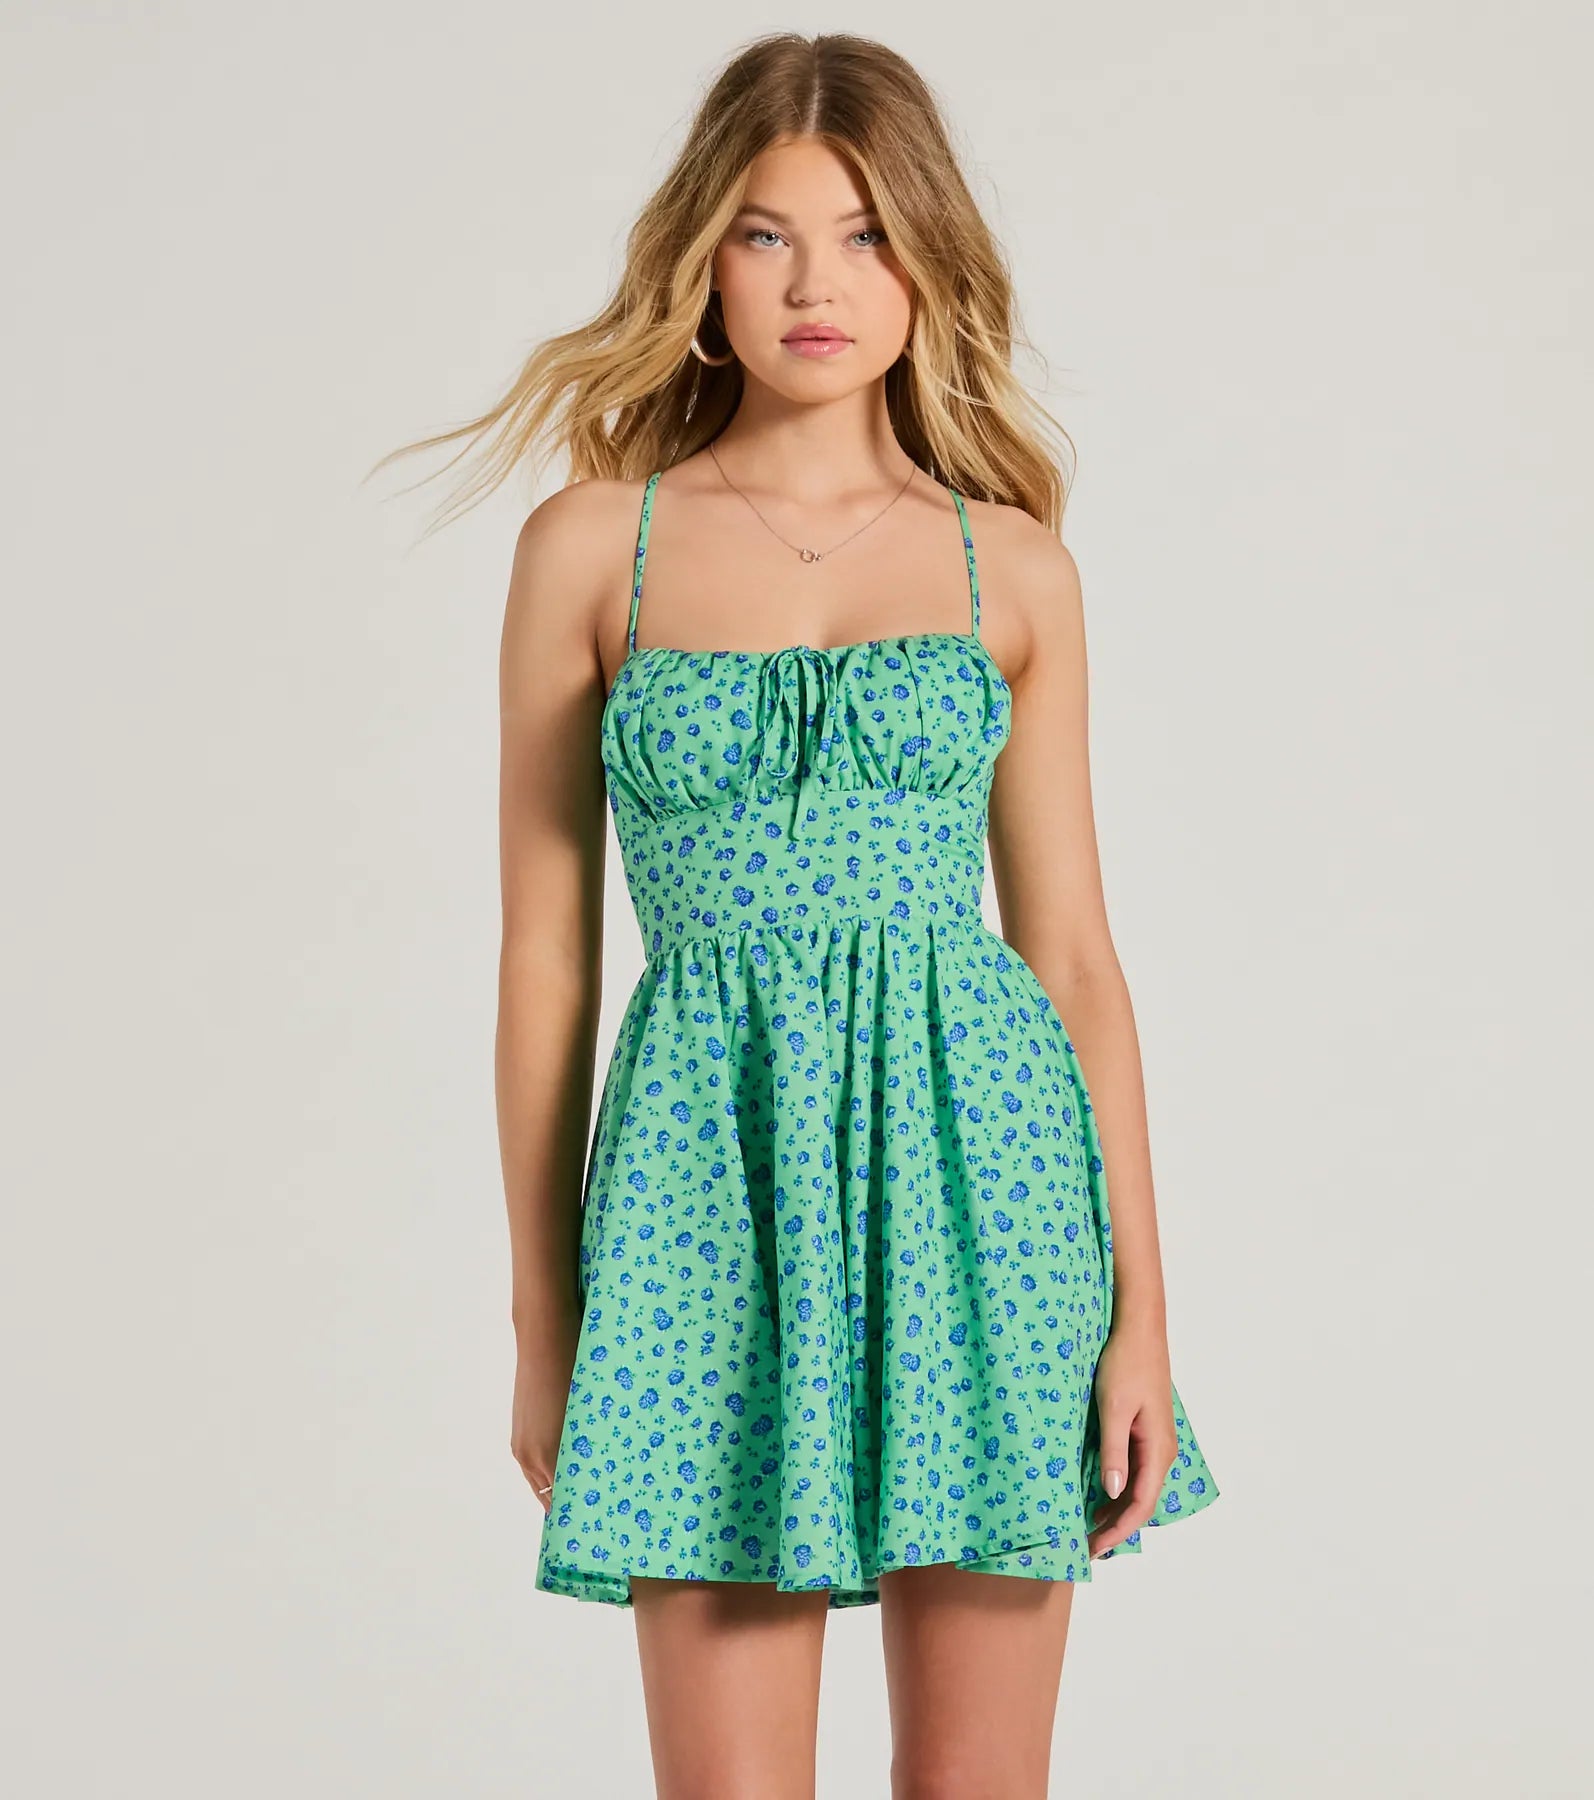 Square Neck Lace Floral Print Lace-Up Spaghetti Strap Skater Dress/Midi Dress With a Bow(s)